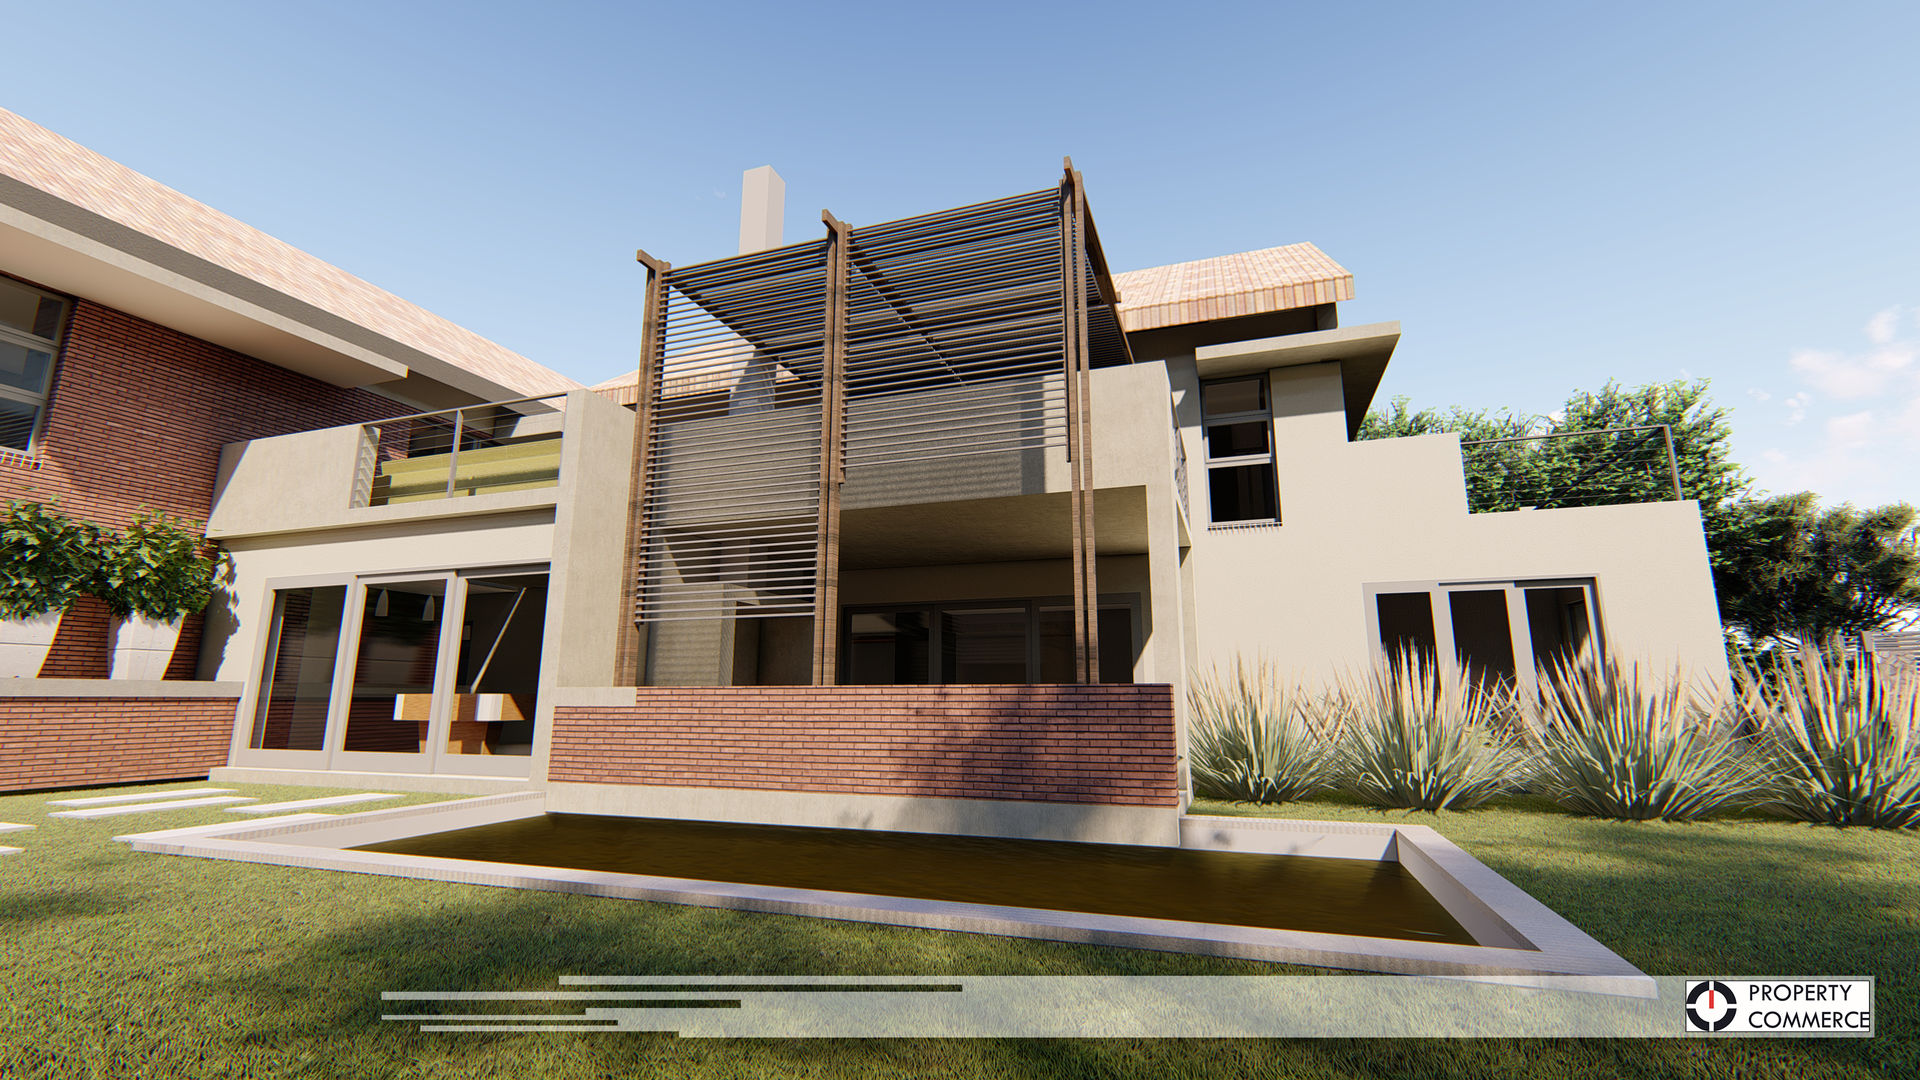 House Companie, Property Commerce Architects Property Commerce Architects Patios